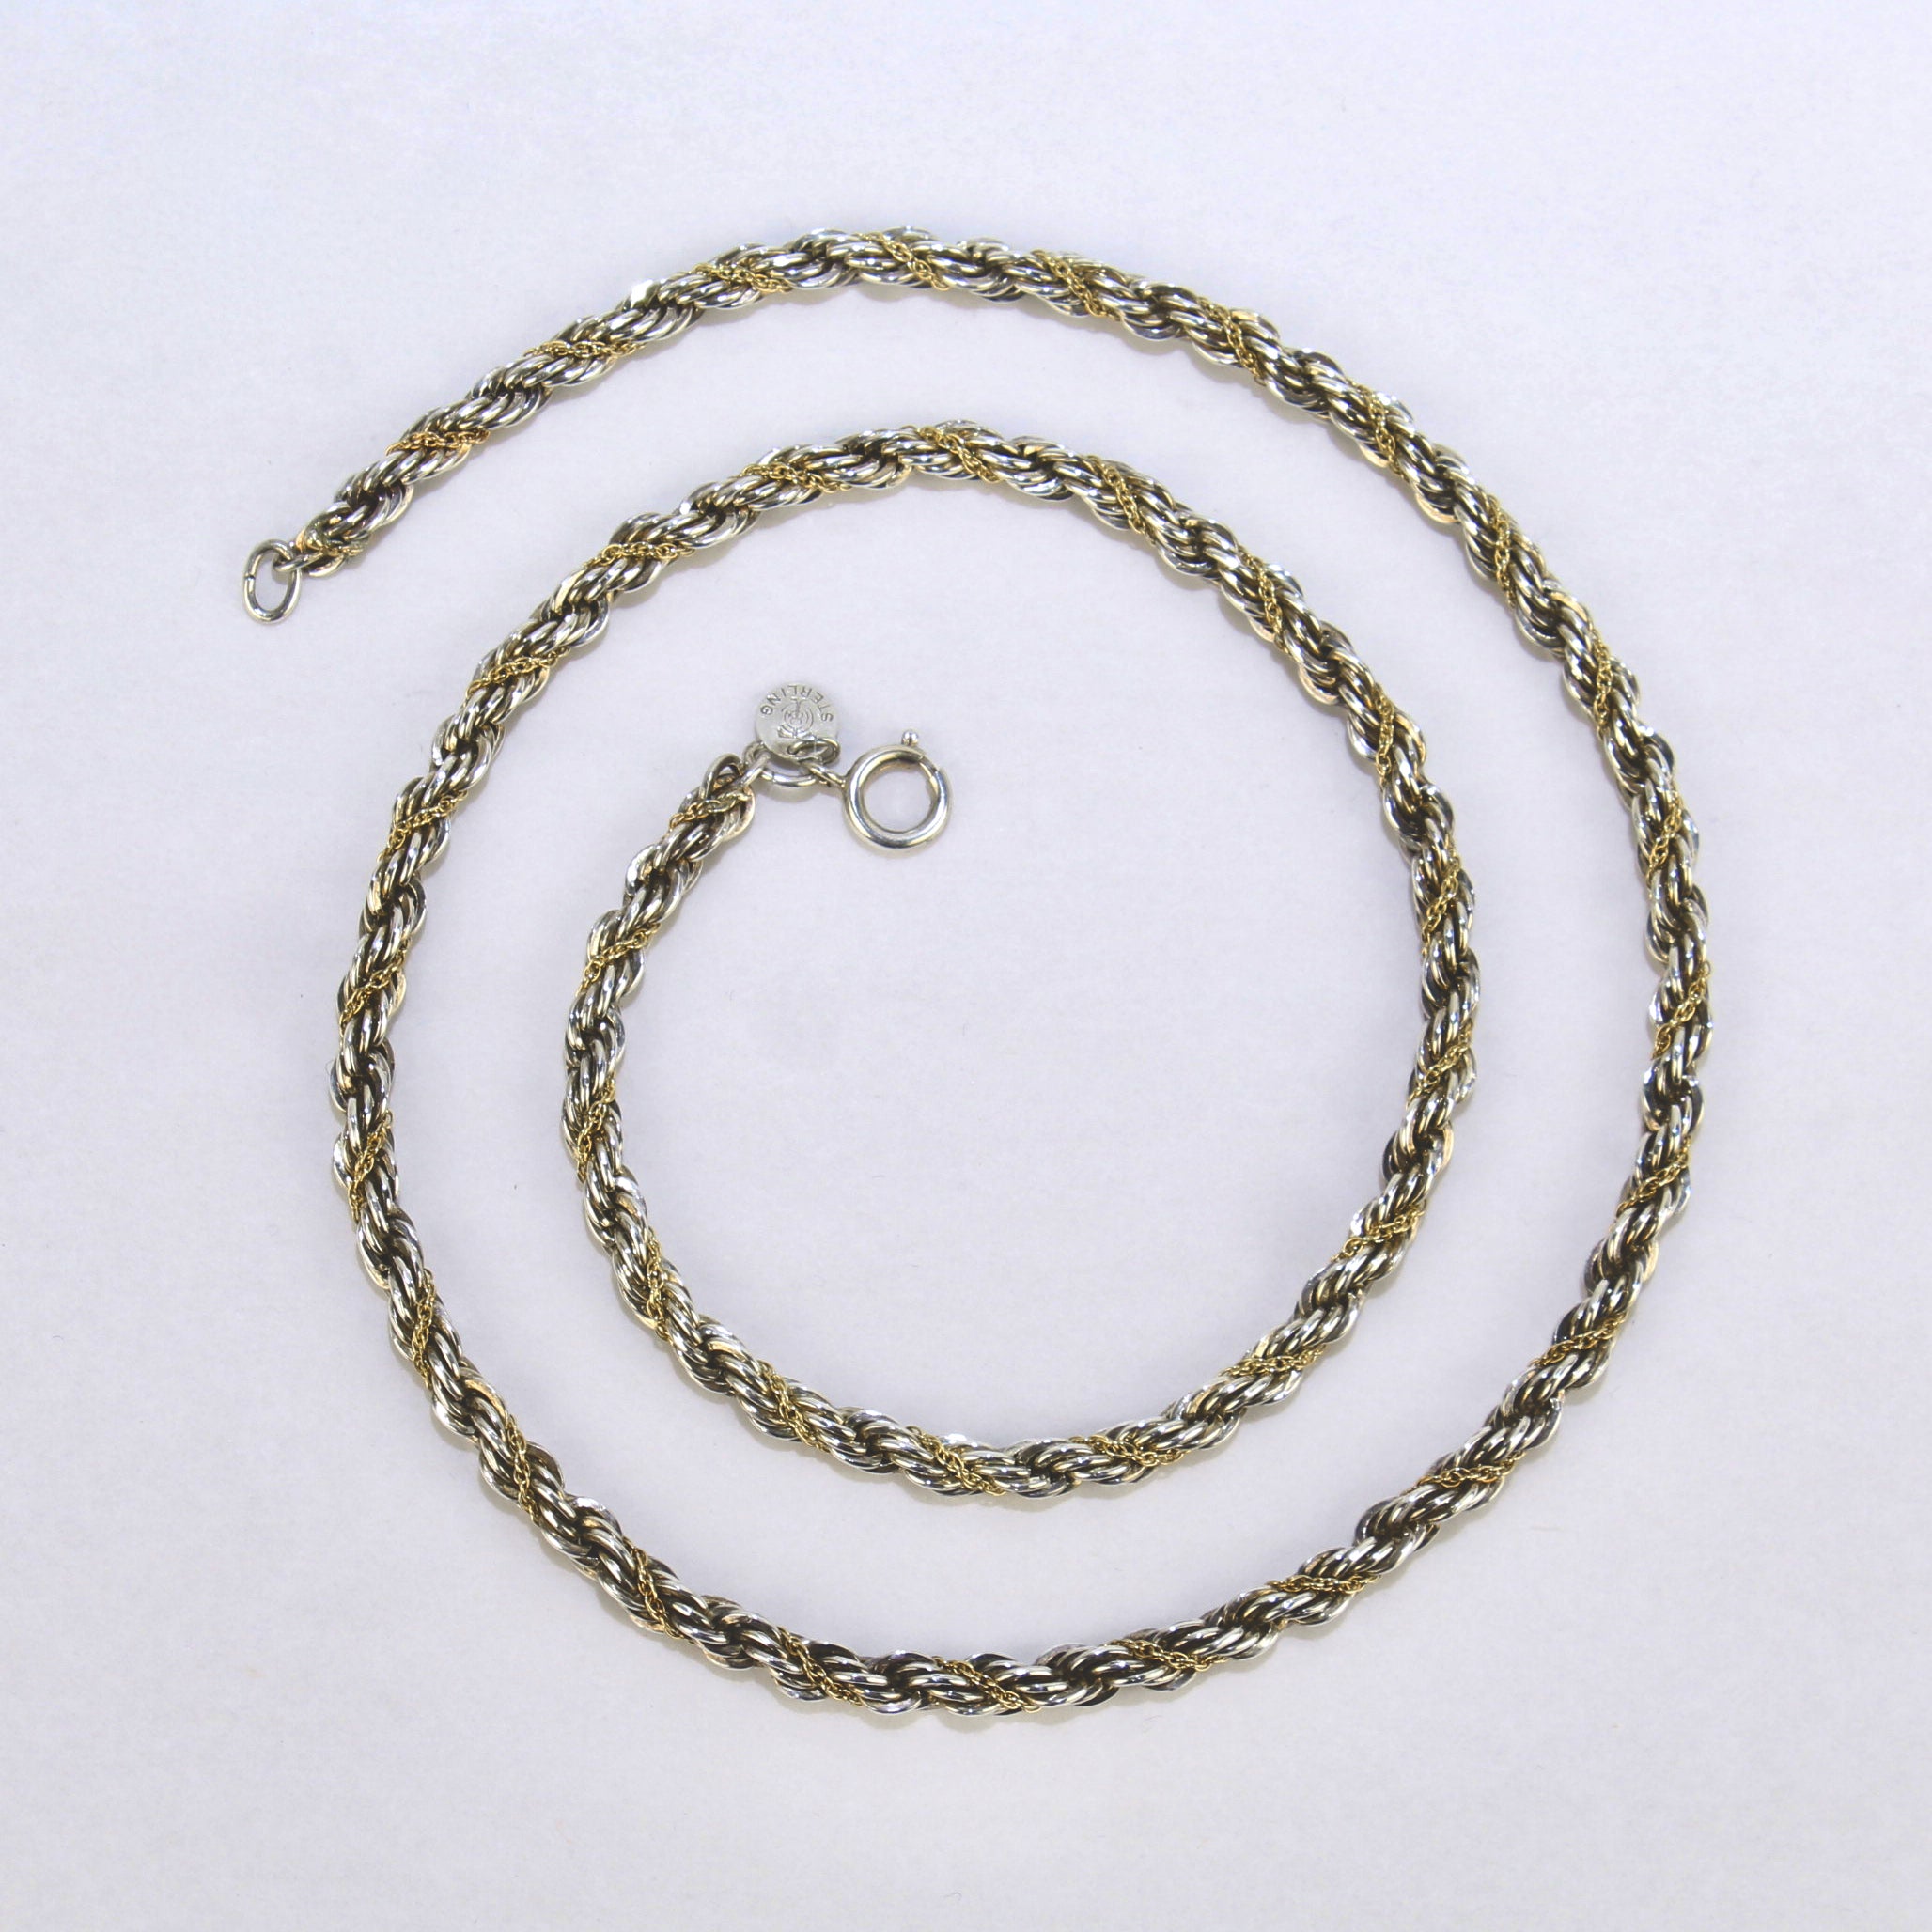 A very fine Tiffany & Co. 14k gold and sterling silver rope twist necklace.

Comprised of a long 24-inch sterling silver rope-link necklace with twisted 14k gold cable chain wrapped in between the silver link pattern. 

Simply a wonderful Tiffany